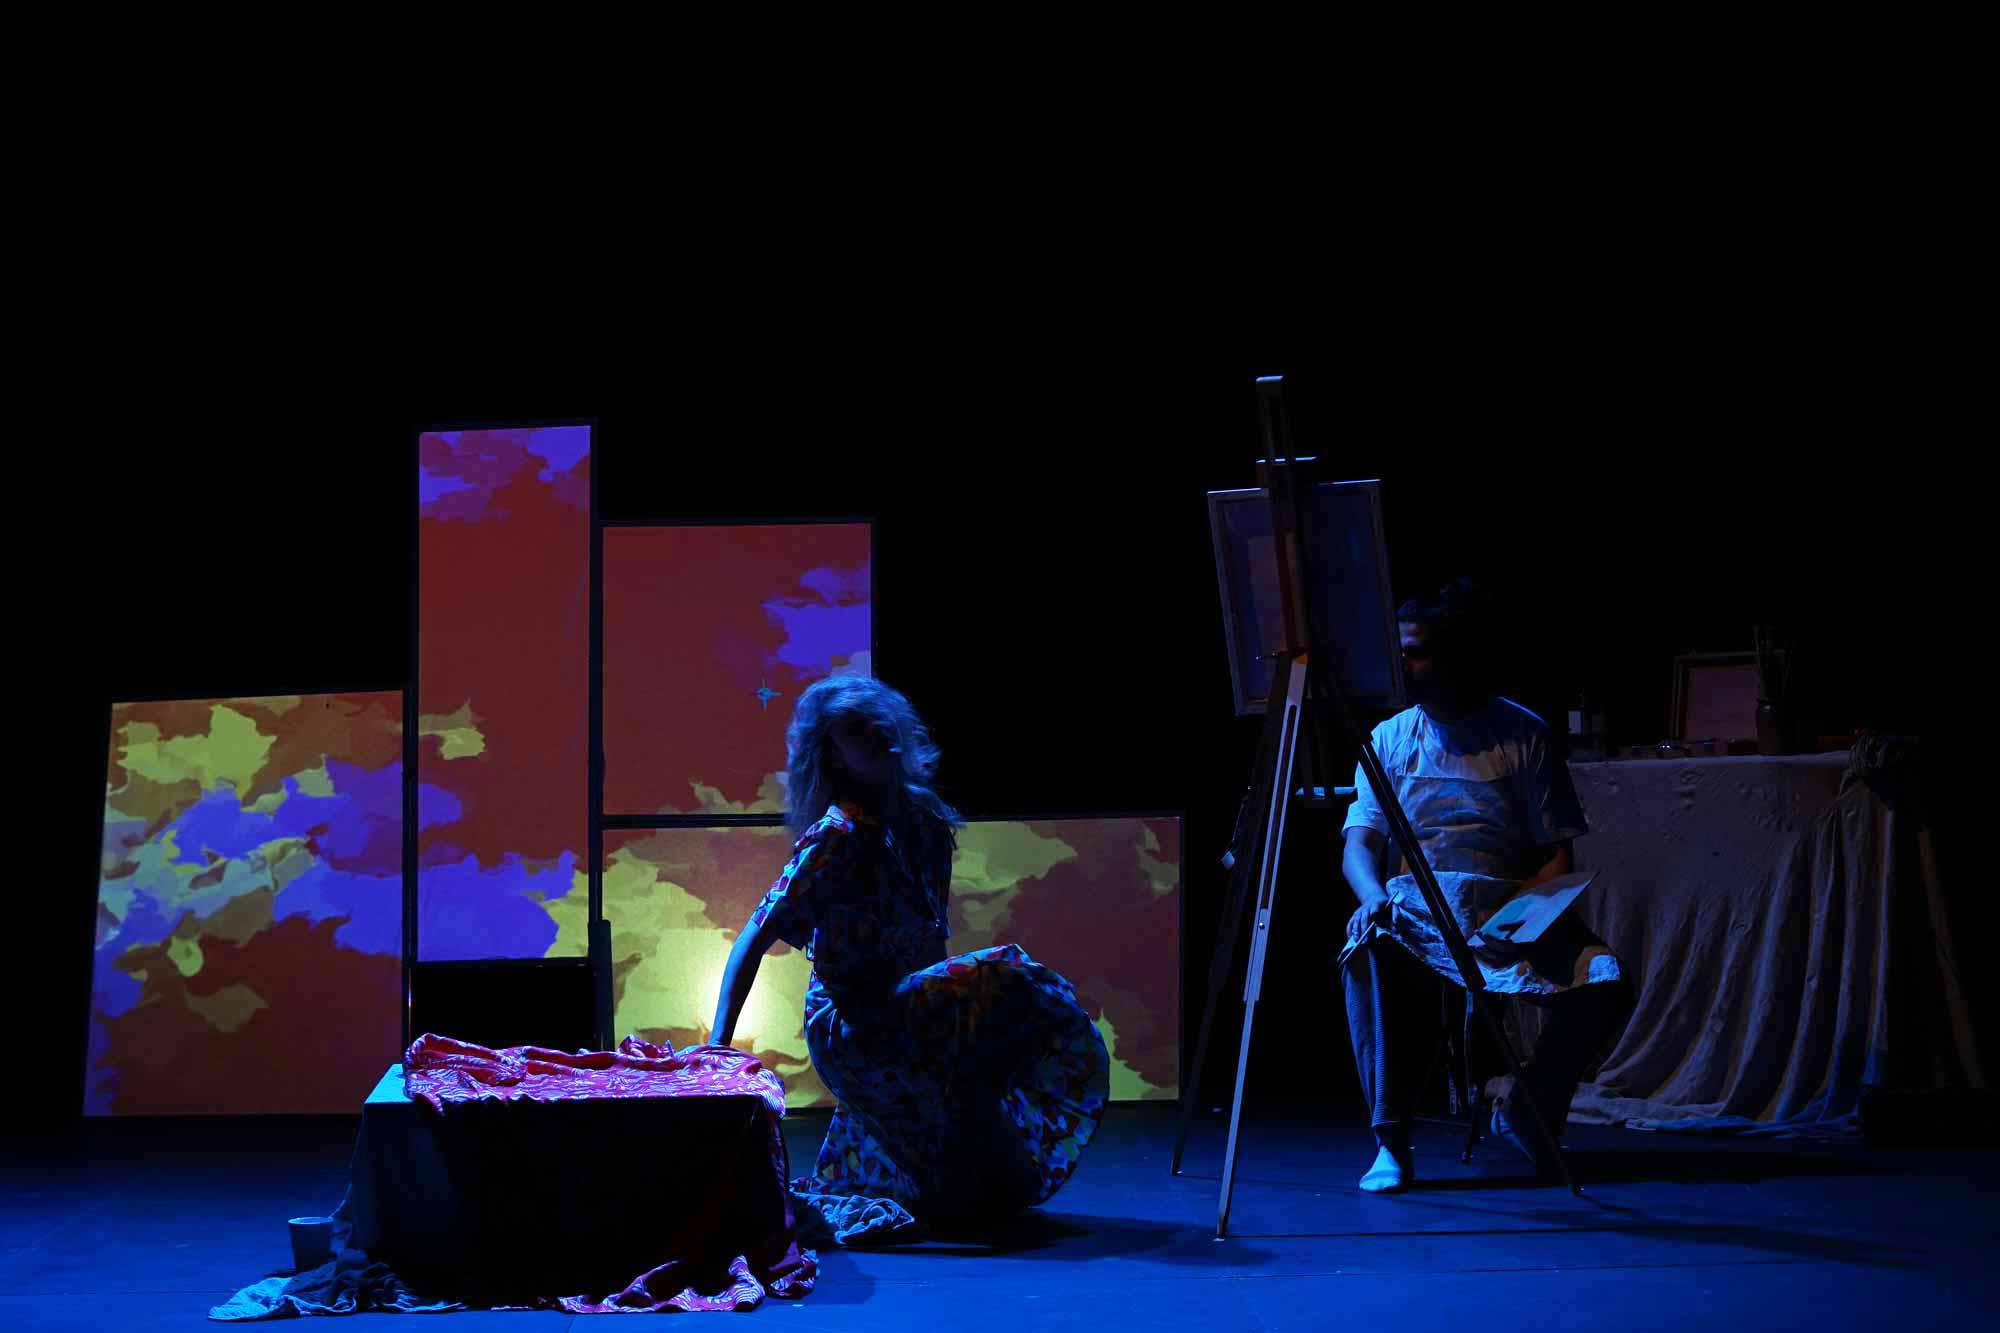 four screens stacked on top of each other creating a geometric effect. With splatters of colours from red, to yellow to purple. A Woman is crouching close to the floor as a male artist paints on his easel.